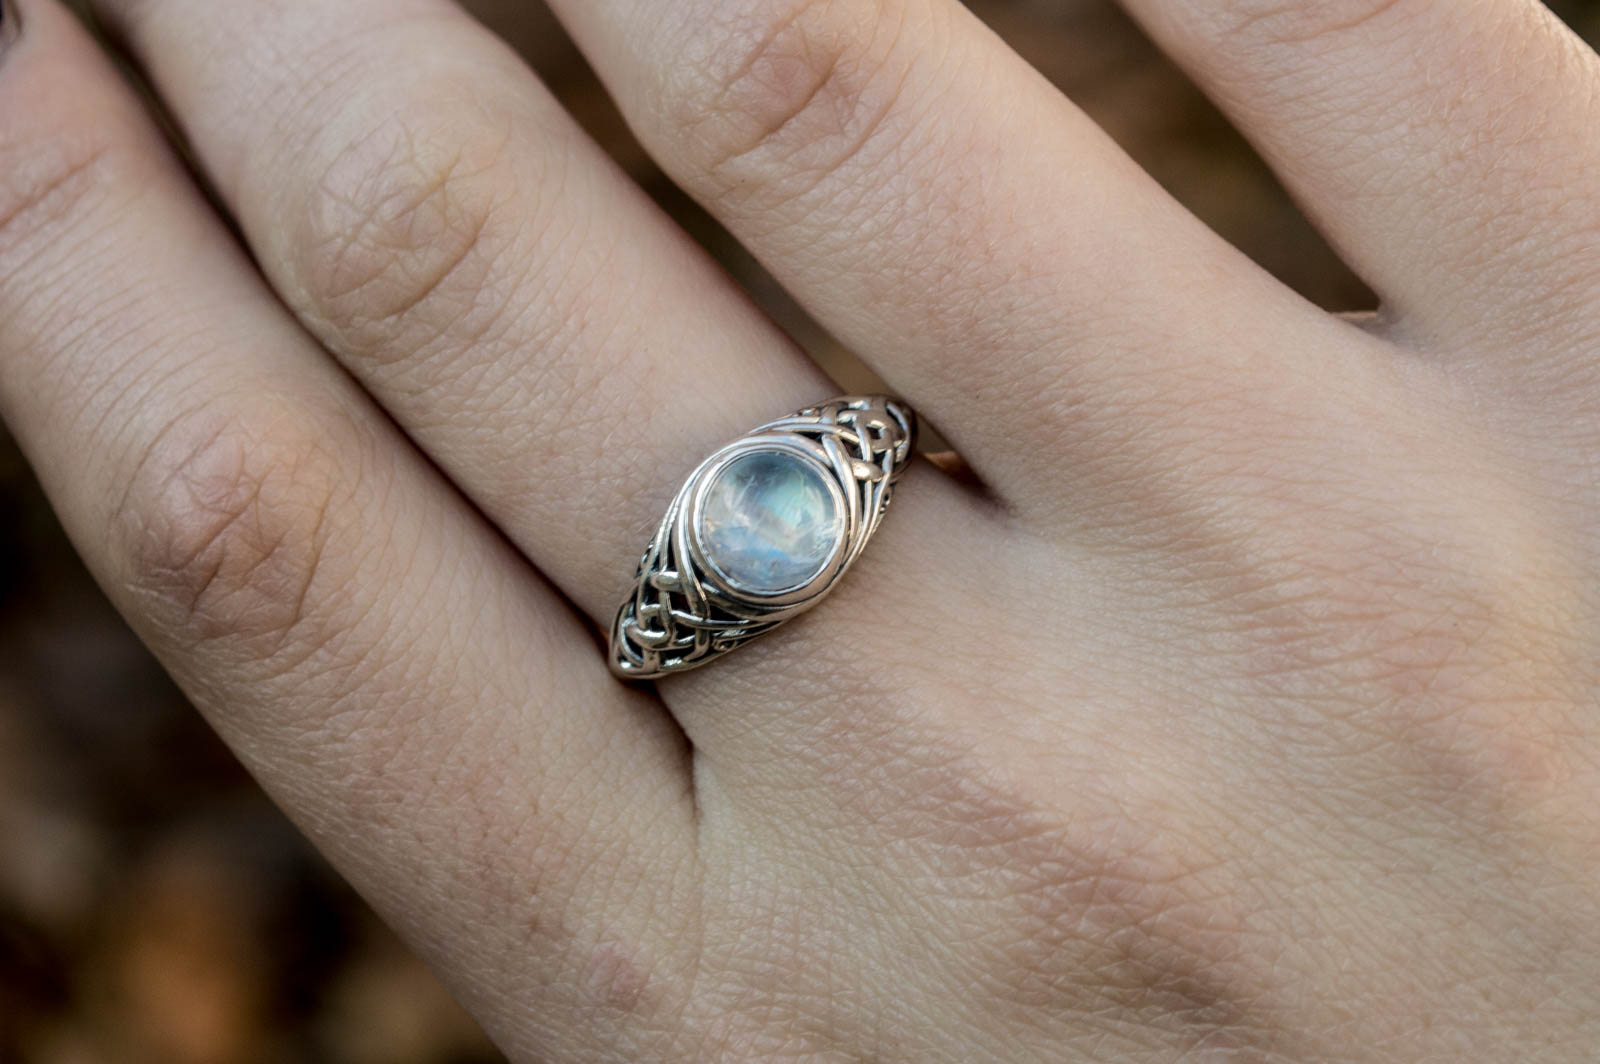 Ring with White Opal Sterling Silver Unique Handmade Jewelry - vikingworkshop